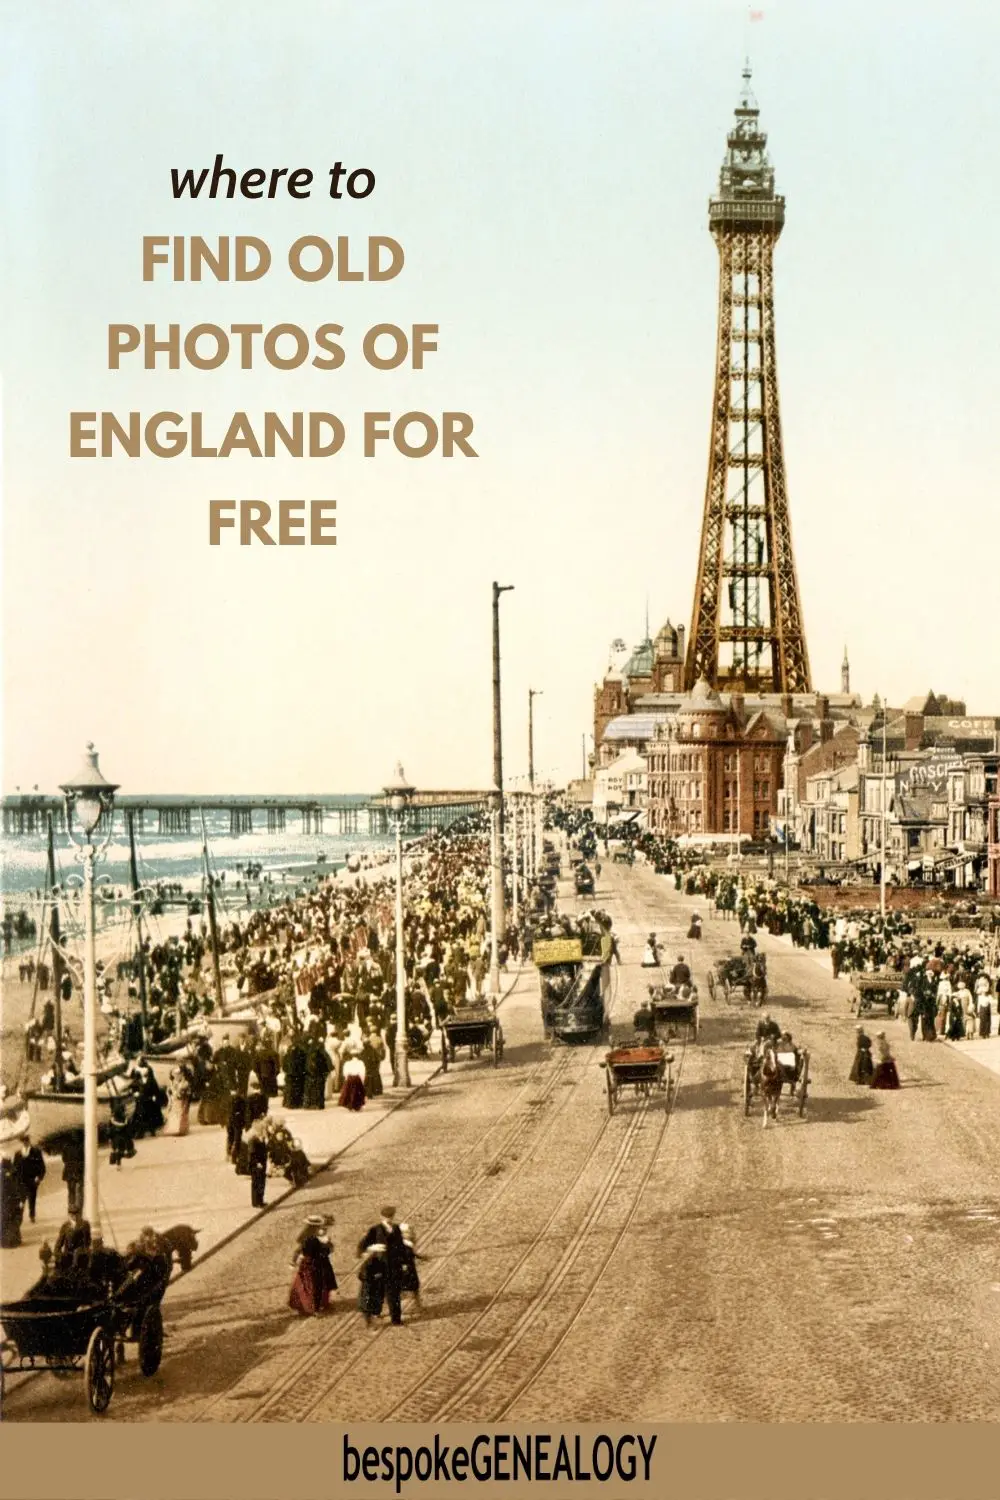 Where to find old photos of England for free. Vintage photo of Blackpool showing the Tower and beach.